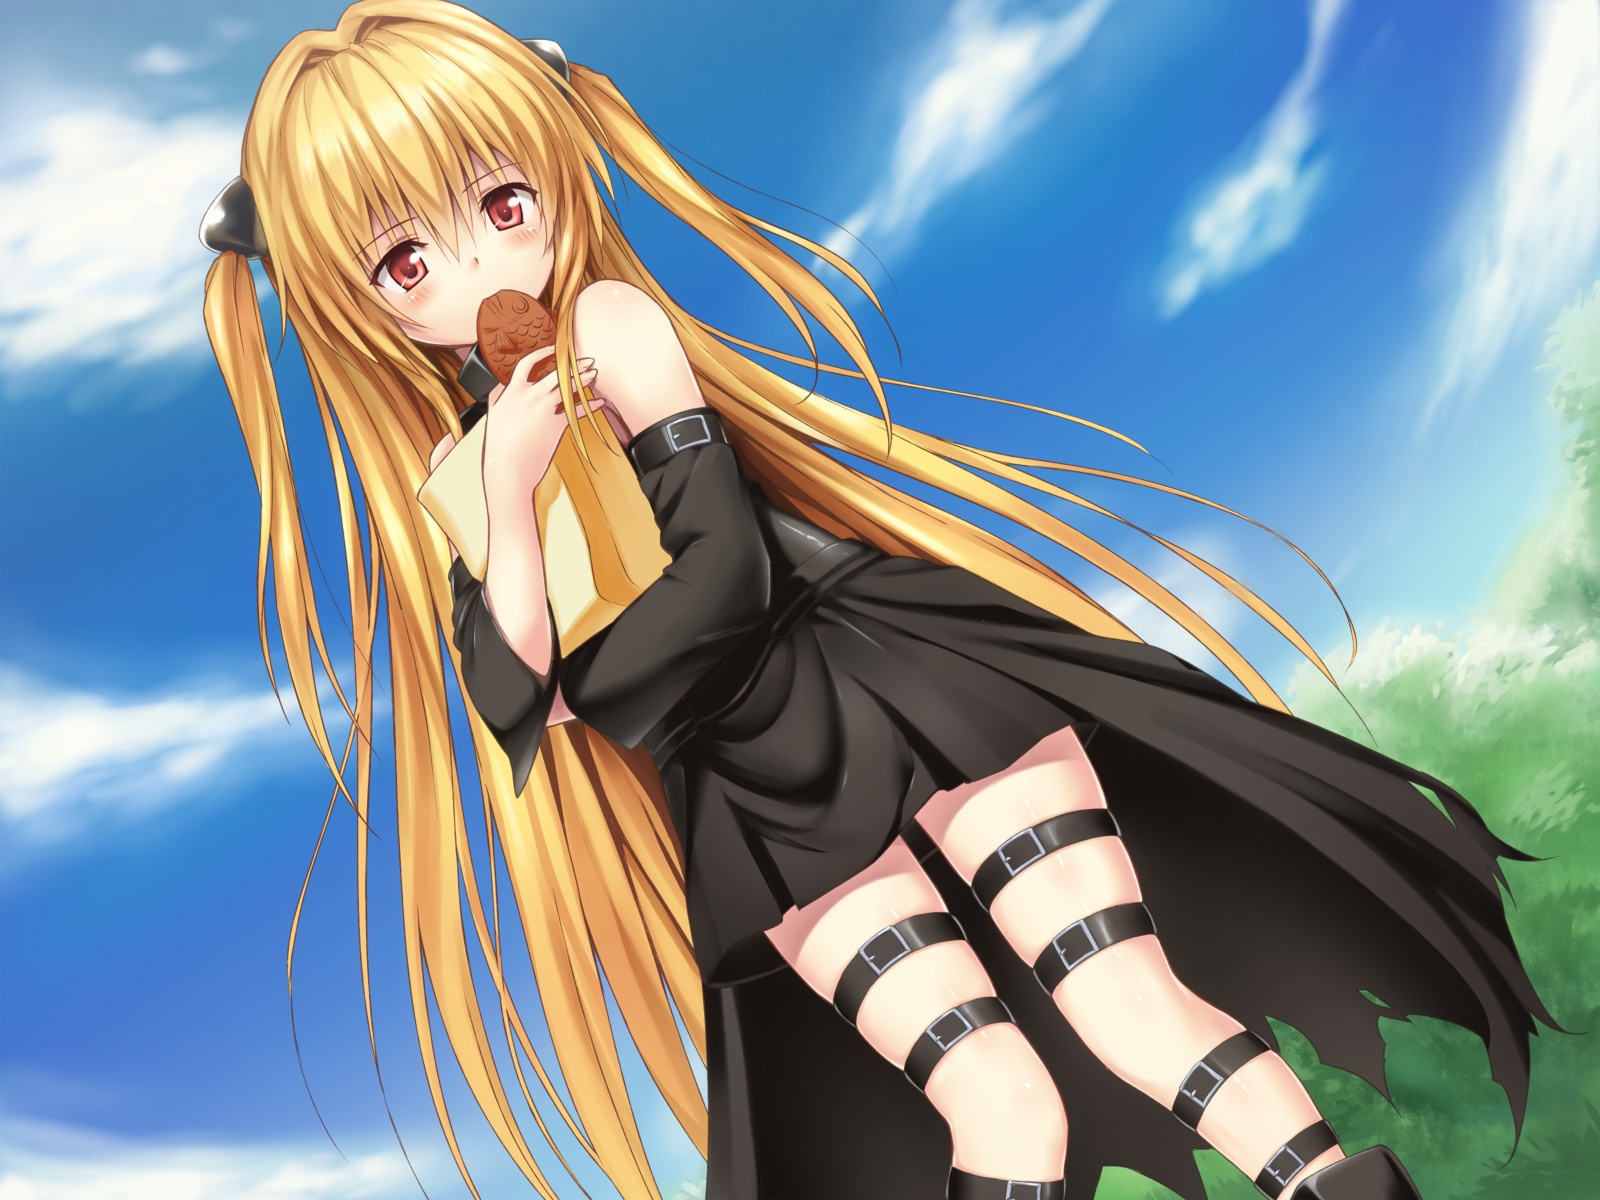 Free Download Tolove 06 36 1600x10 For Your Desktop Mobile Tablet Explore 48 To Love Ru Darkness Wallpaper To Love Ru Lala Wallpaper To Love Ru Wallpapers Hd To Love Ru Wallpapers